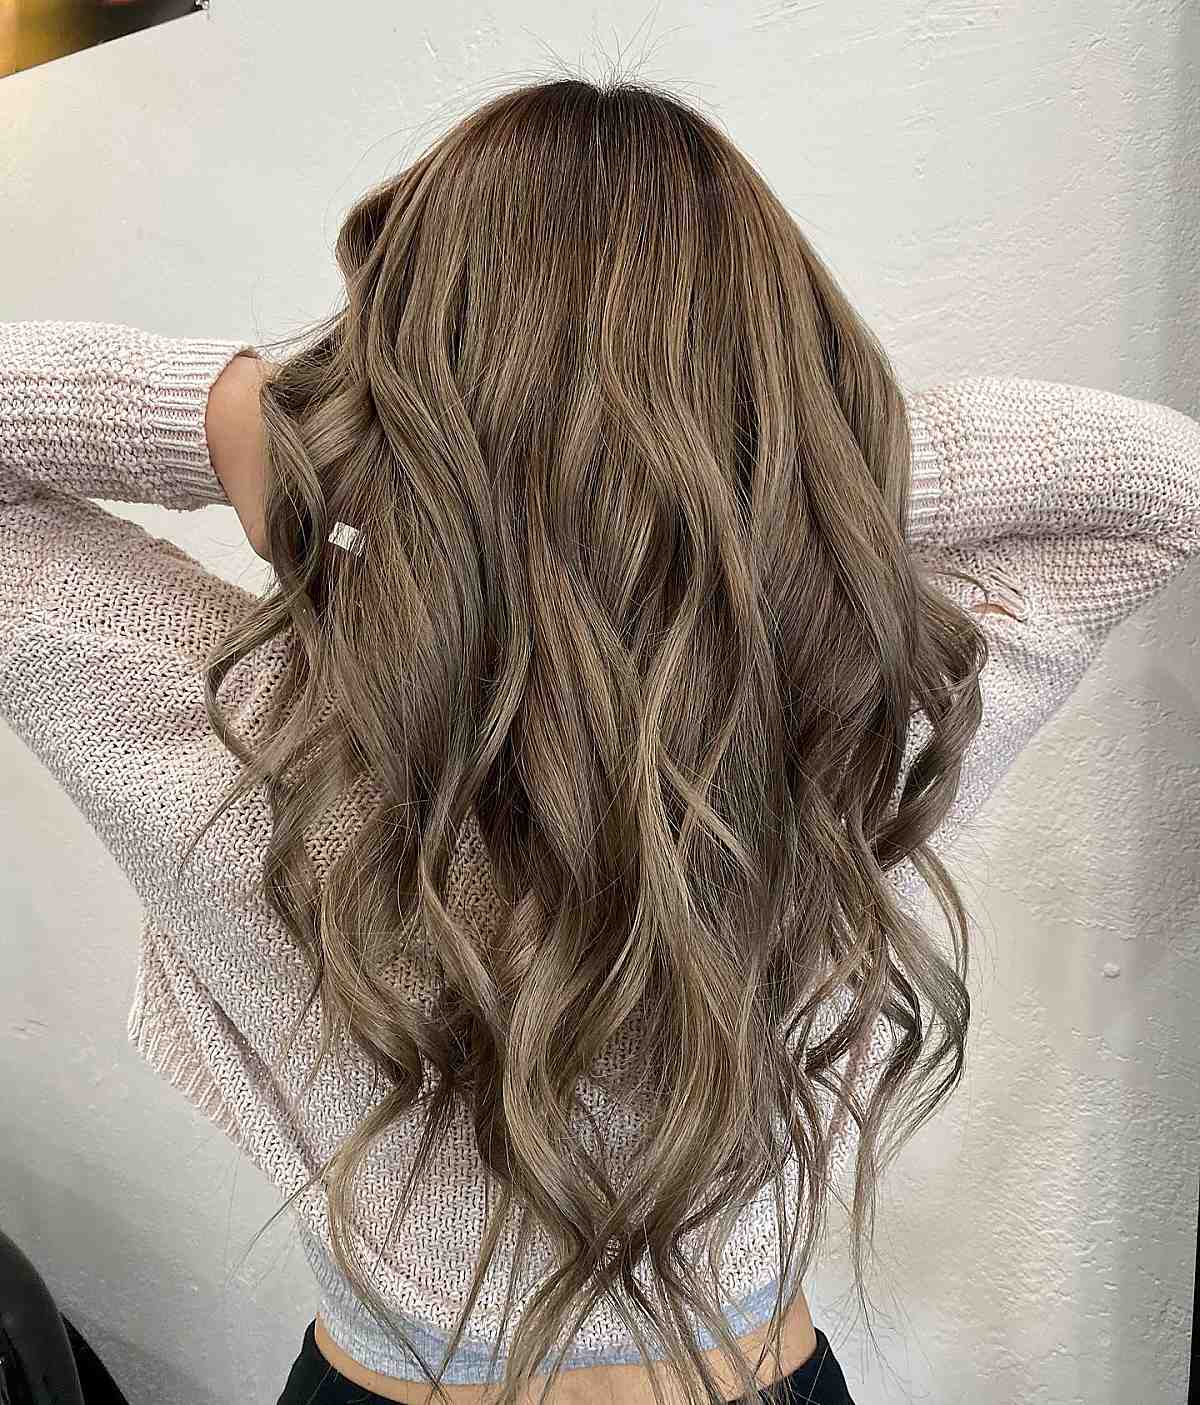 30 Gorgeous Ash Brown Hair Colors &#8211; The Trend You Need to Try